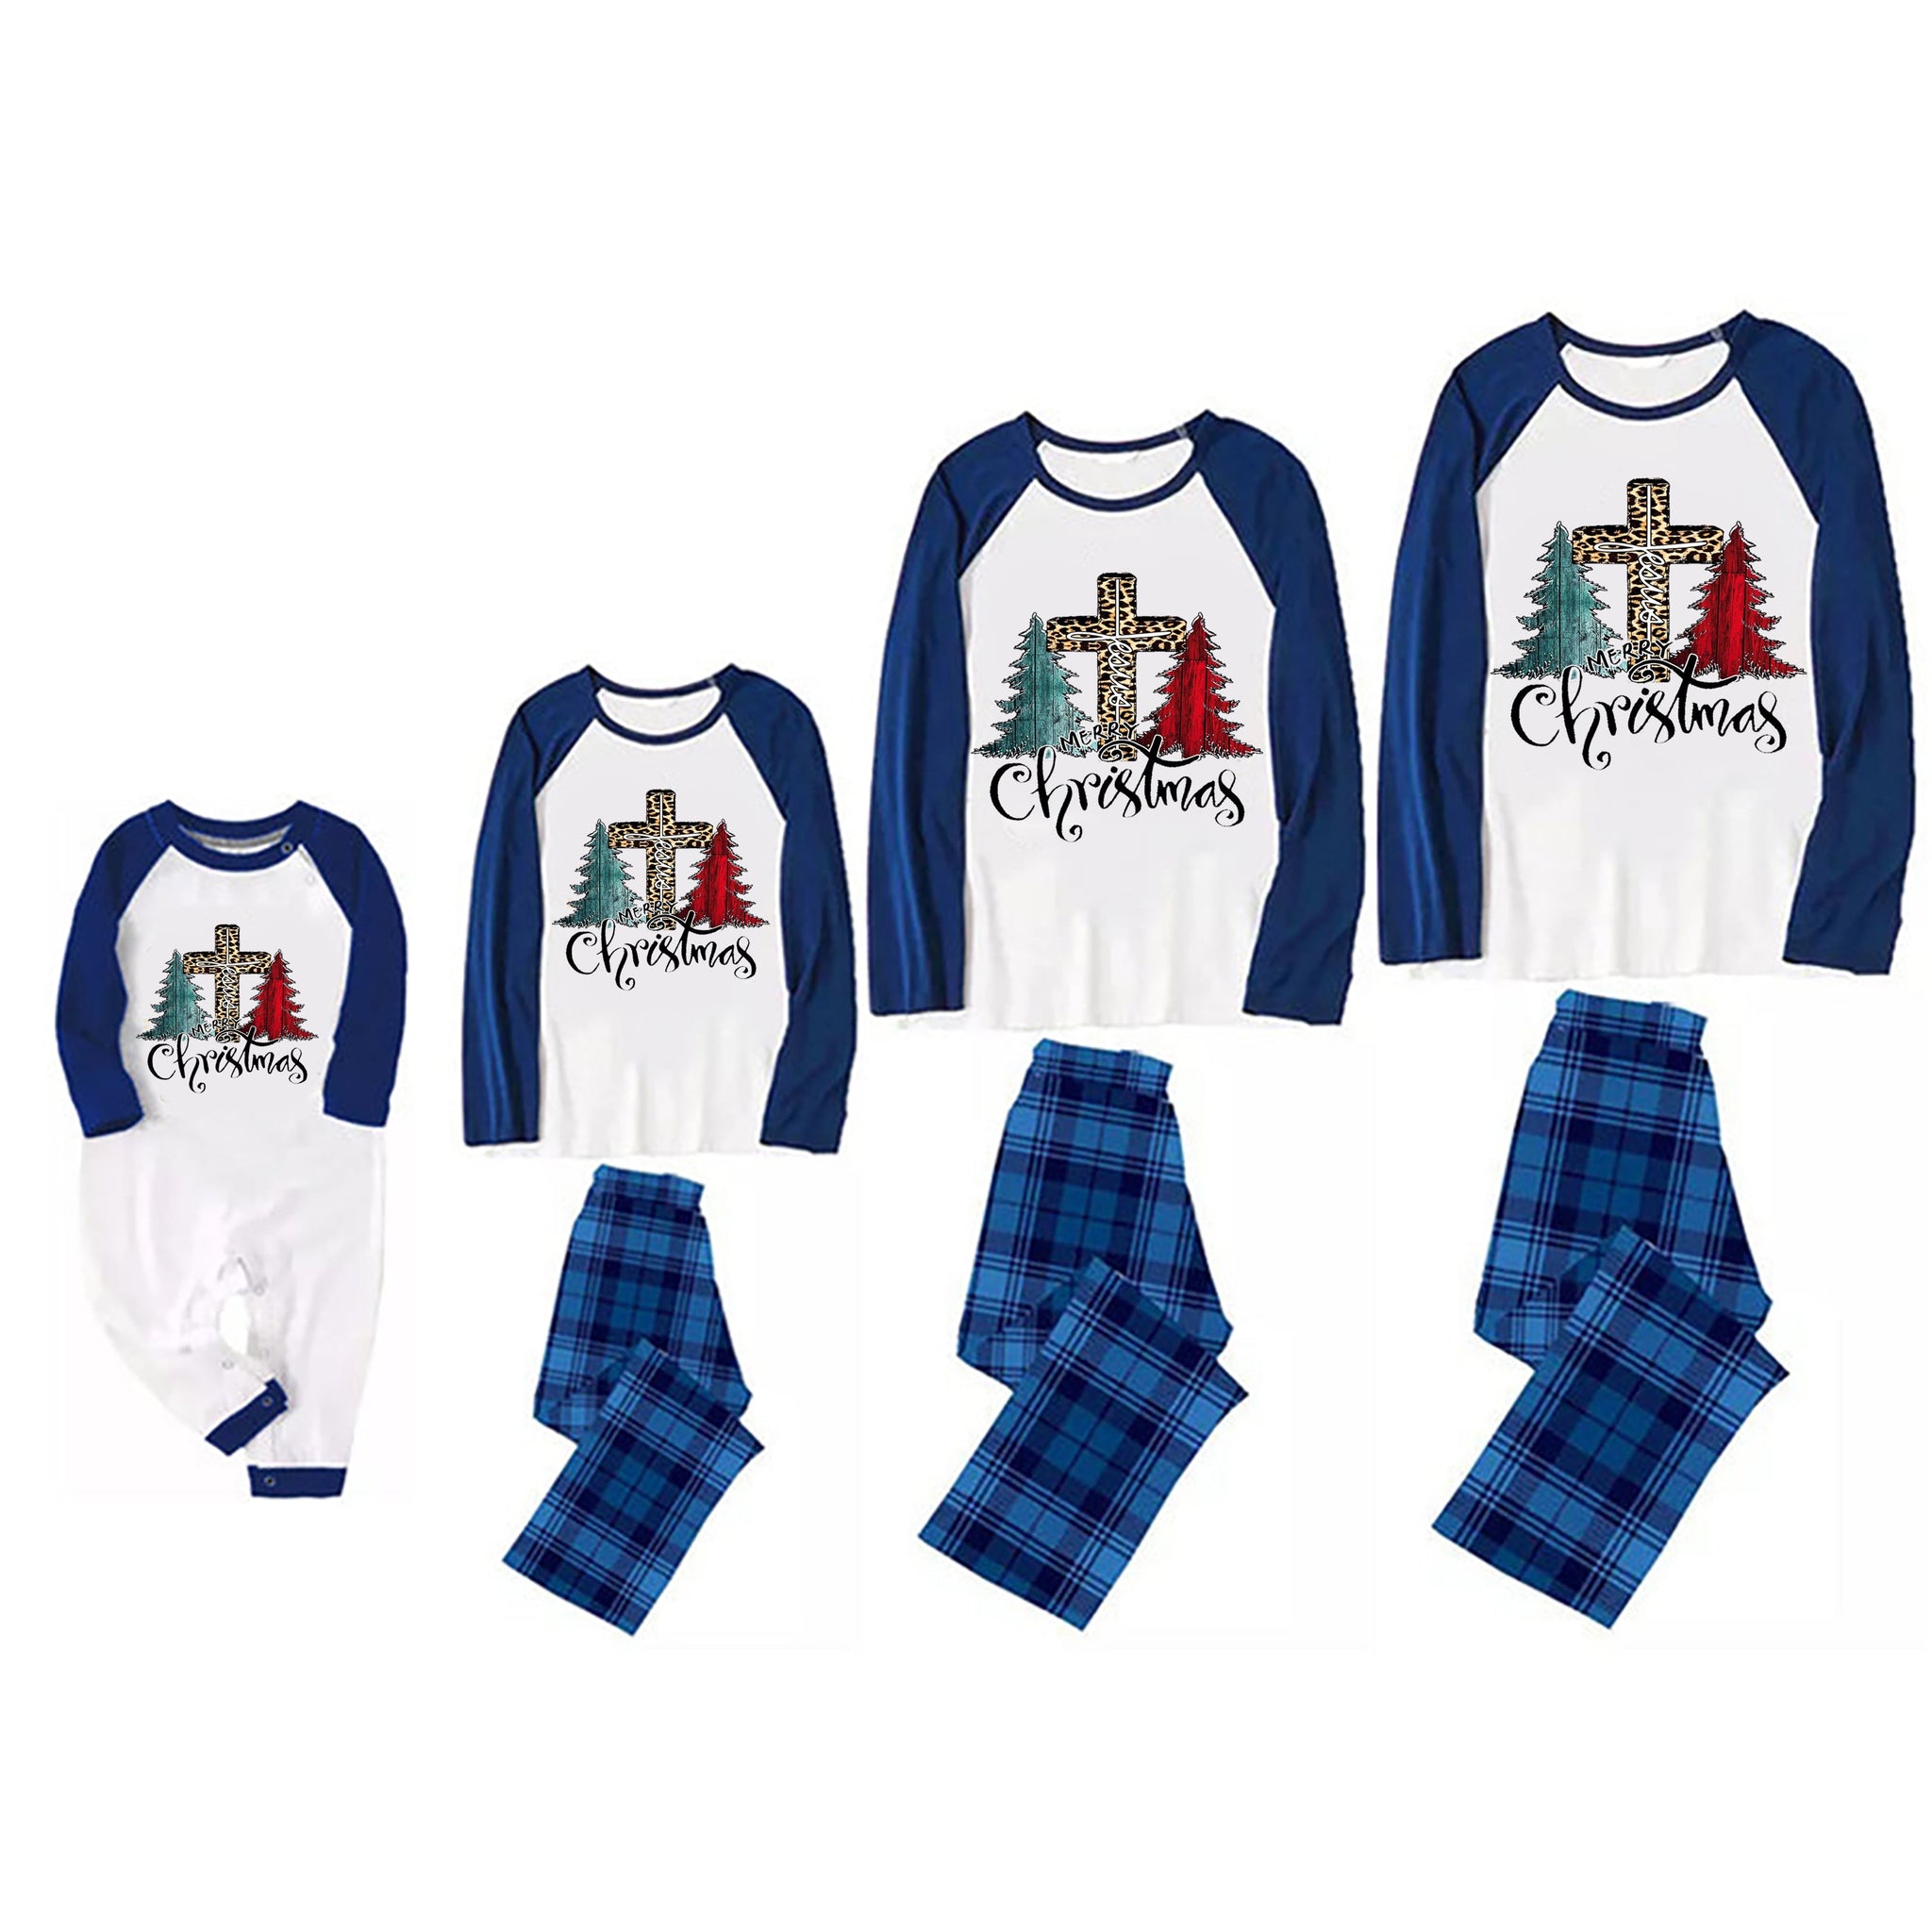 Christmas Cute Cartoon Christmas Tree Buffalo Plaid Cross Patterned and 'MERRY Christmas  ' Letter Print Casual Long Sleeve Sweatshirts Contrast Blue & White Top and Black and Blue Plaid Pants Family Matching Pajamas Sets